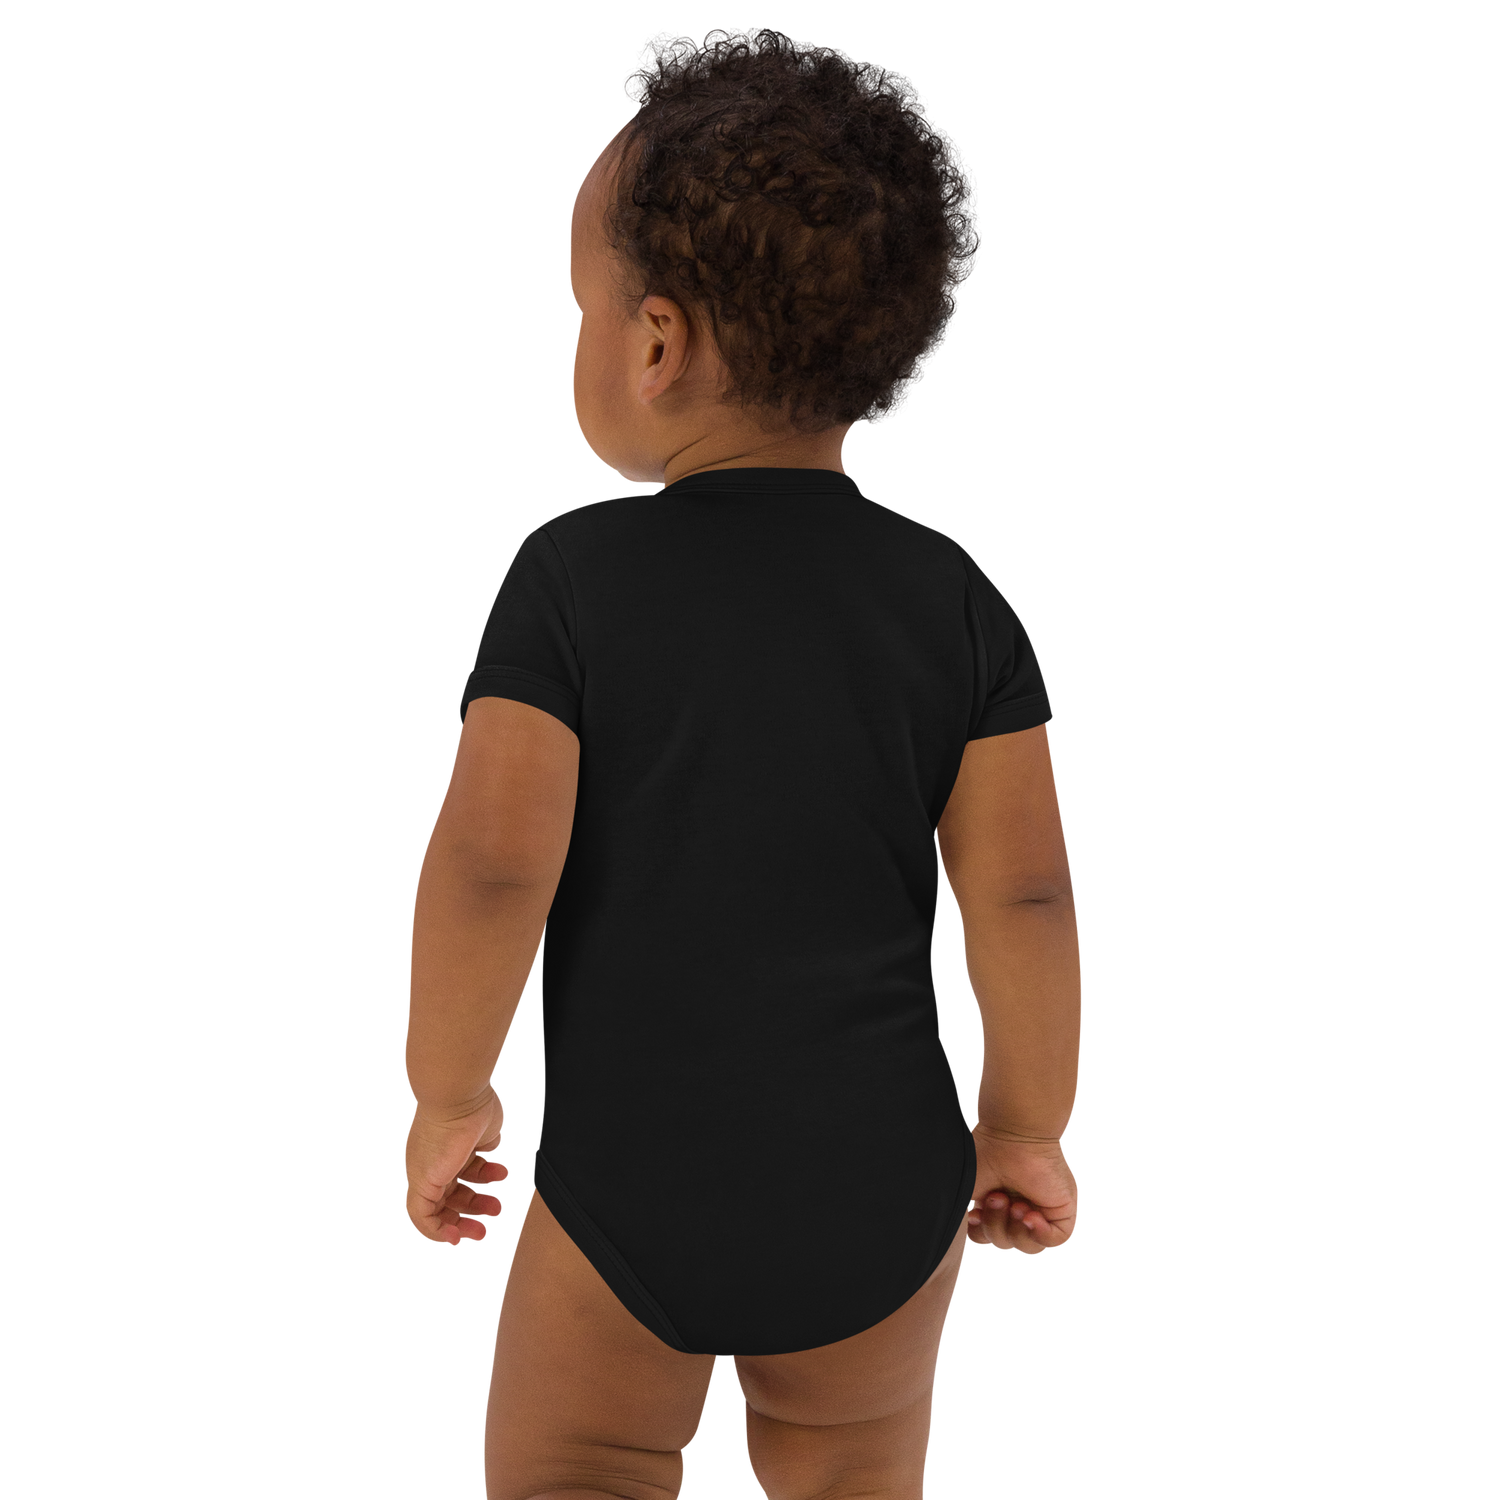 Live With Purpose Organic Cotton Baby Bodysuit - True Principles in Black: Soft, Stretchy, and Sustainable Infant Fashion.